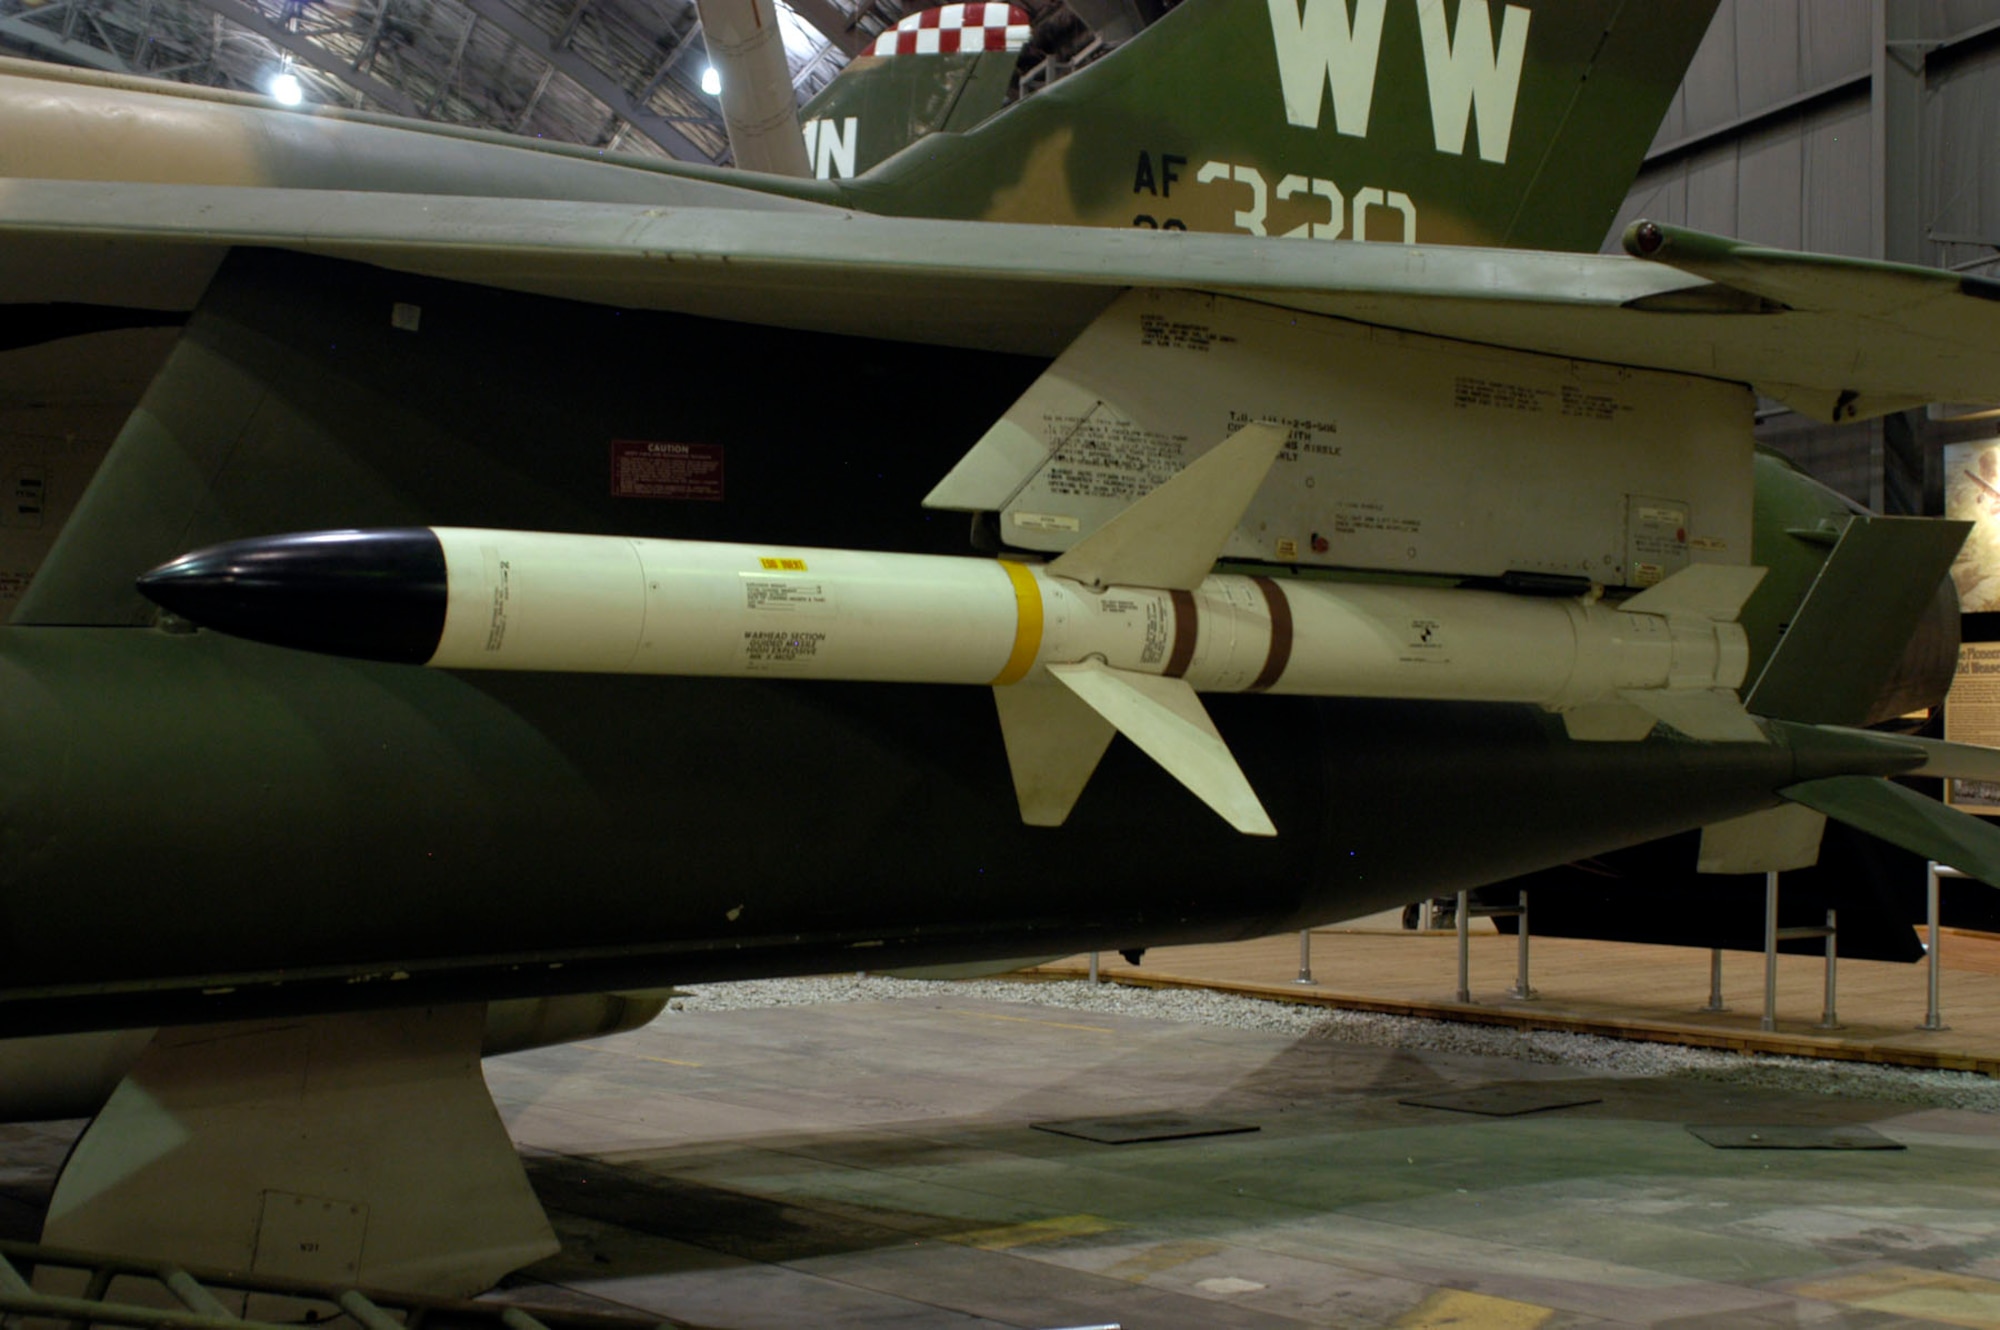 DAYTON, Ohio - The AGM-45 Shrike Anti-Radar Missile on display in the First In, Last Out: Wild Weasels vs. SAMs exhibit in the Southeast Asia War Gallery at the National Museum of the U.S. Air Force. (U.S. Air Force photo)